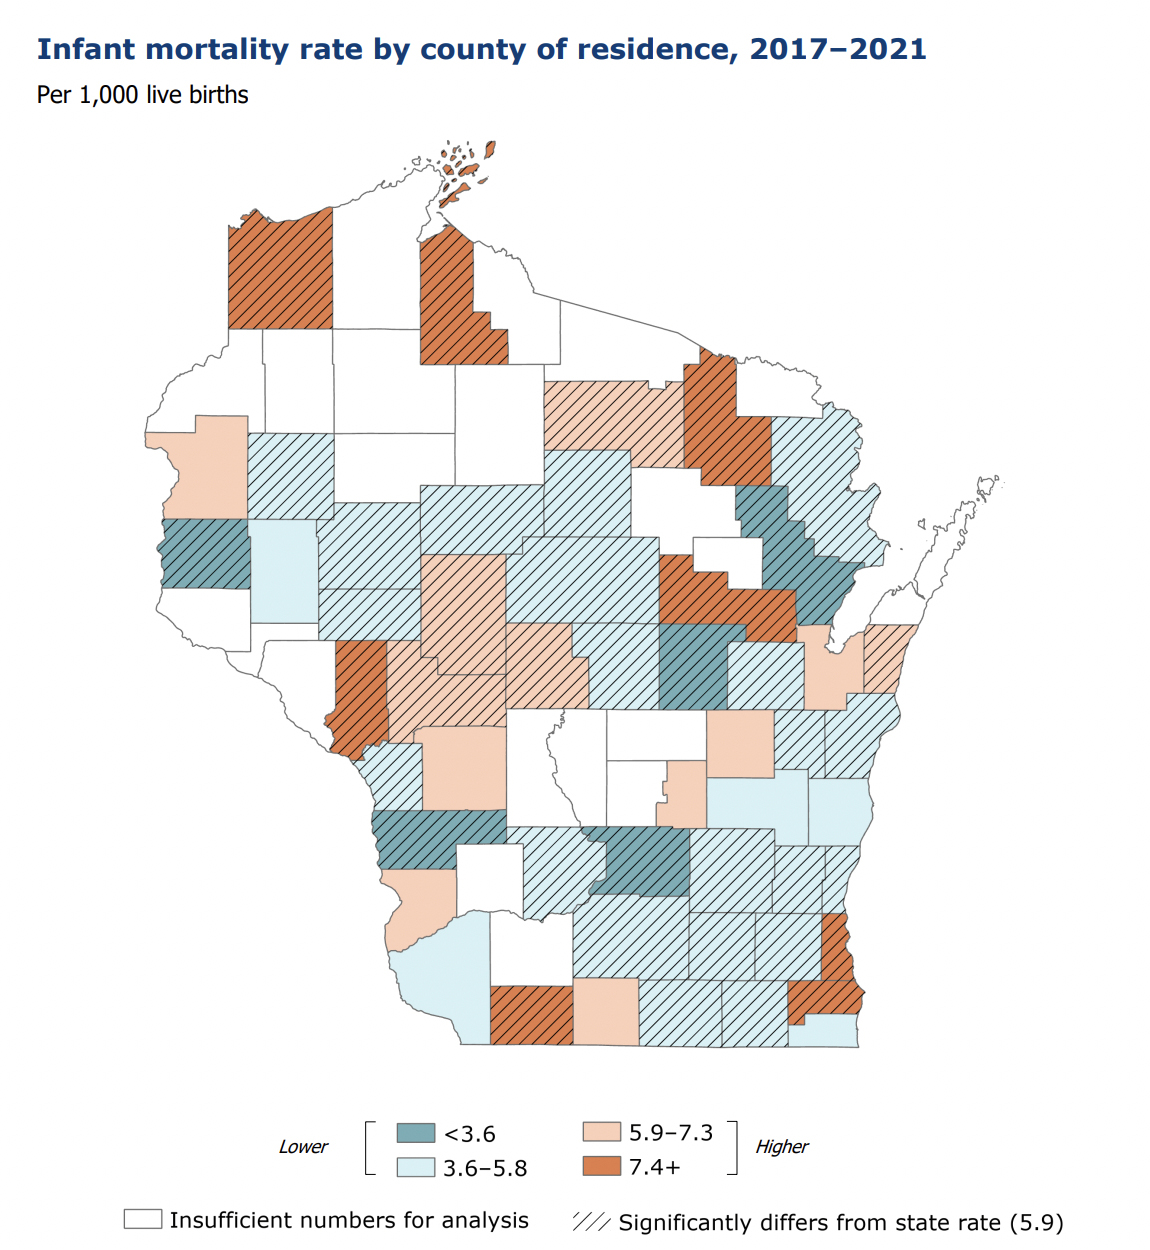 A map with the title "Infant mortality rate by county of residence, 2017-2021" and subtitle "Per 1,000 live births" shows ranges of rates color-coded as higher or lower than average for individual counties in Wisconsin.